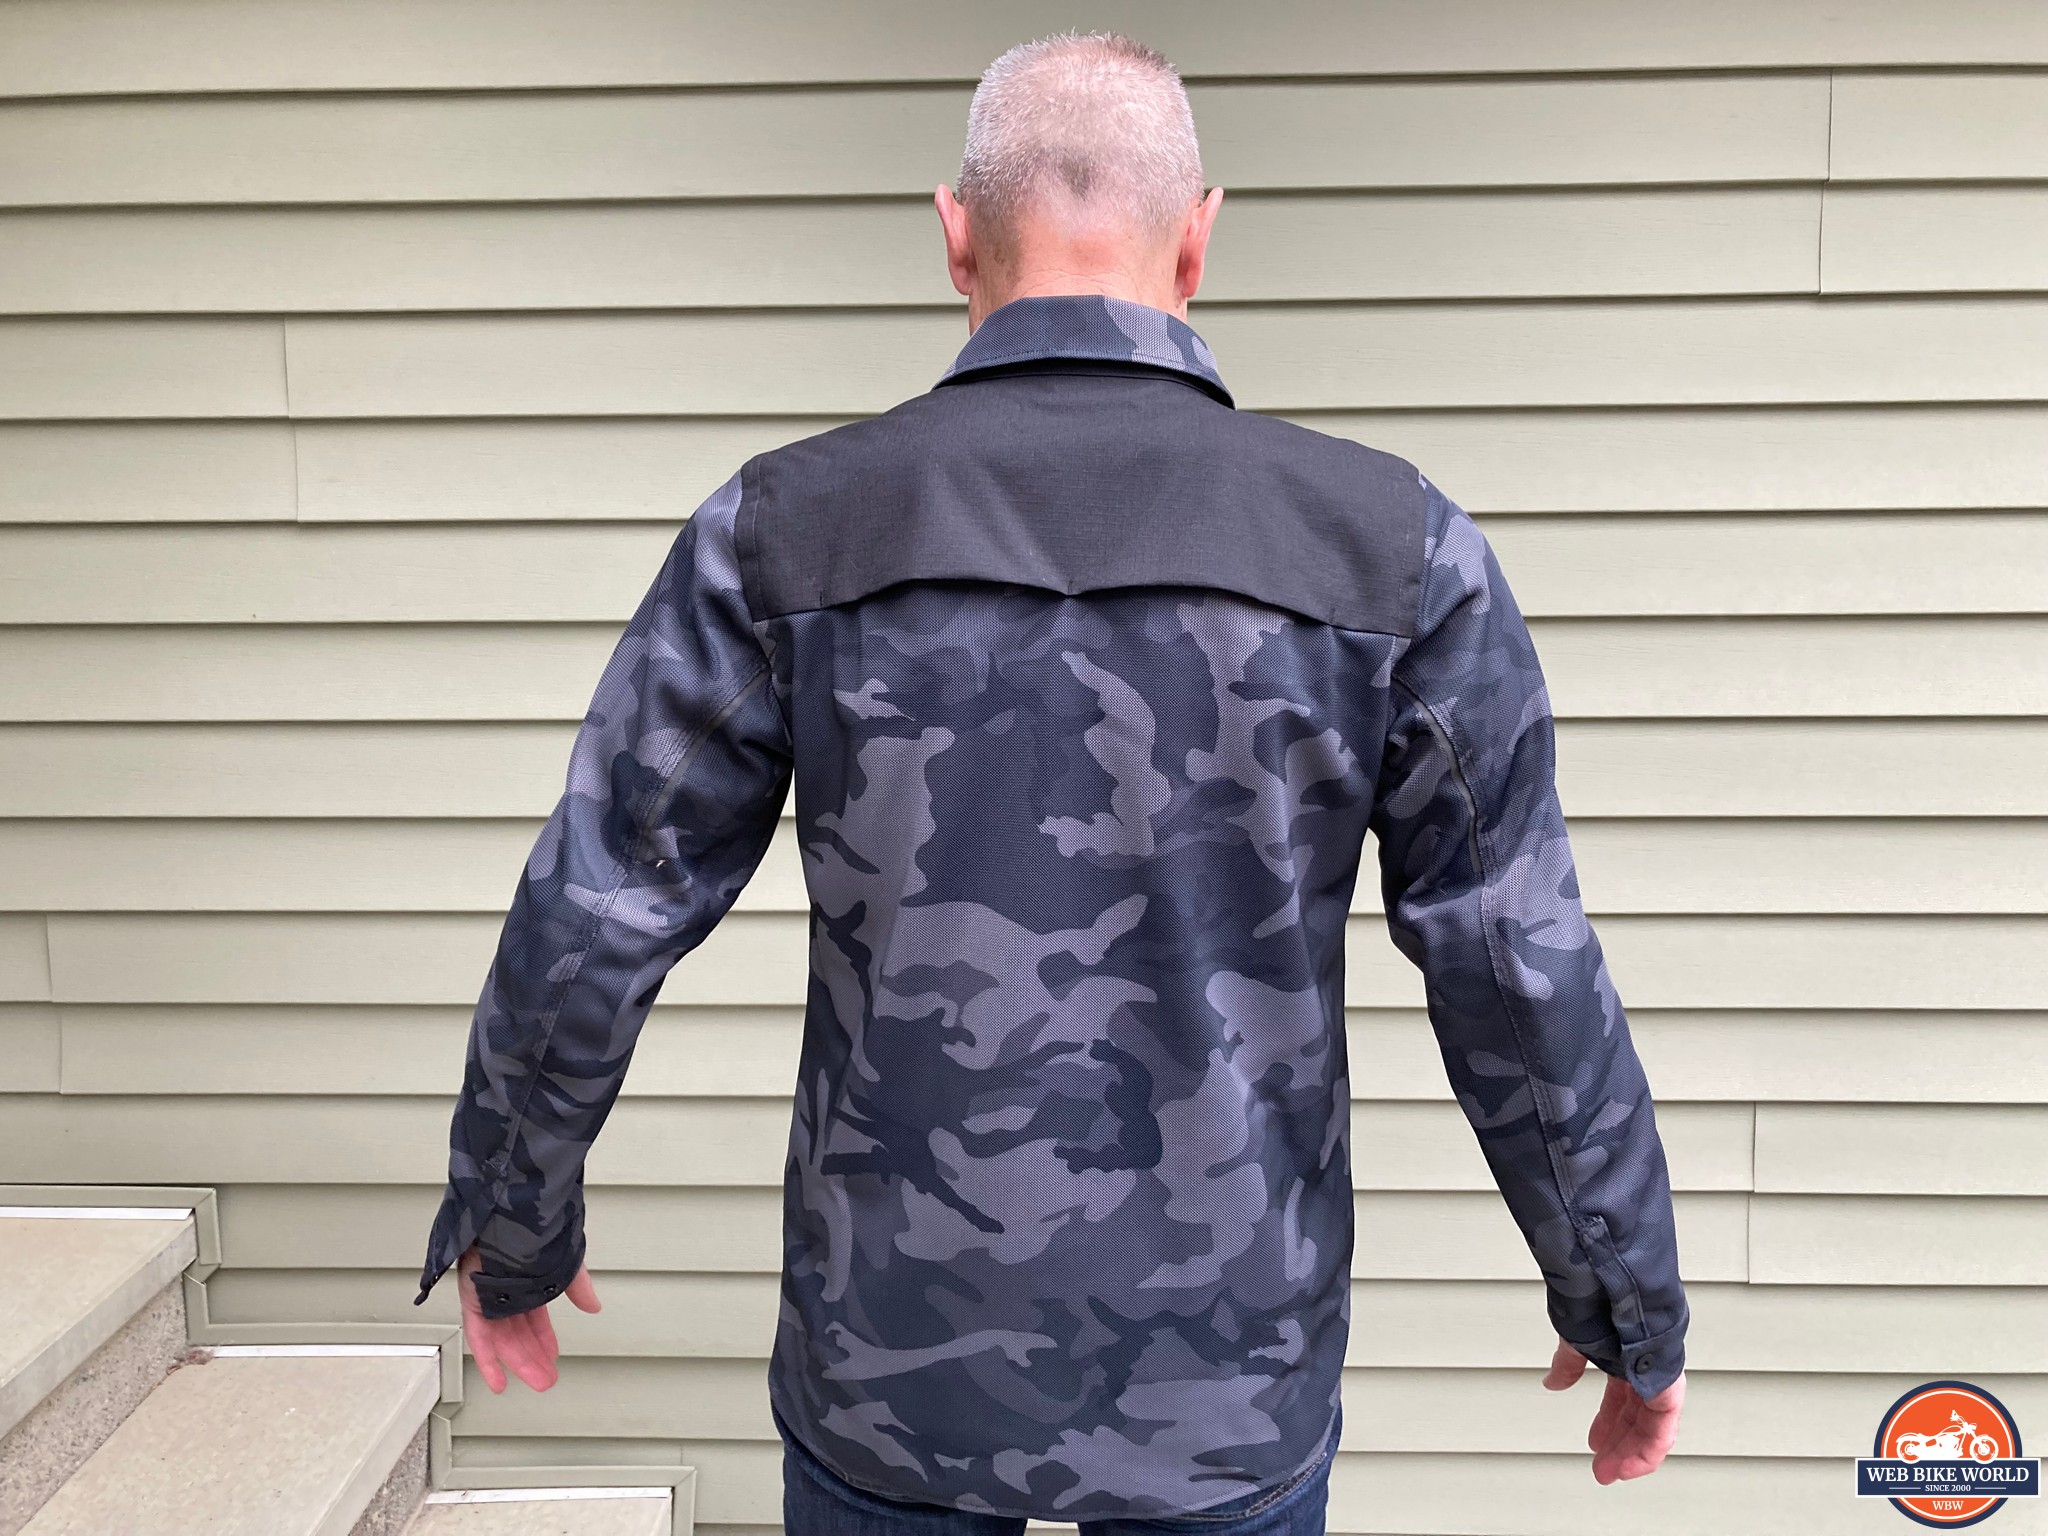 Rear view of the REV'IT! Tracer Air 2 overshirt